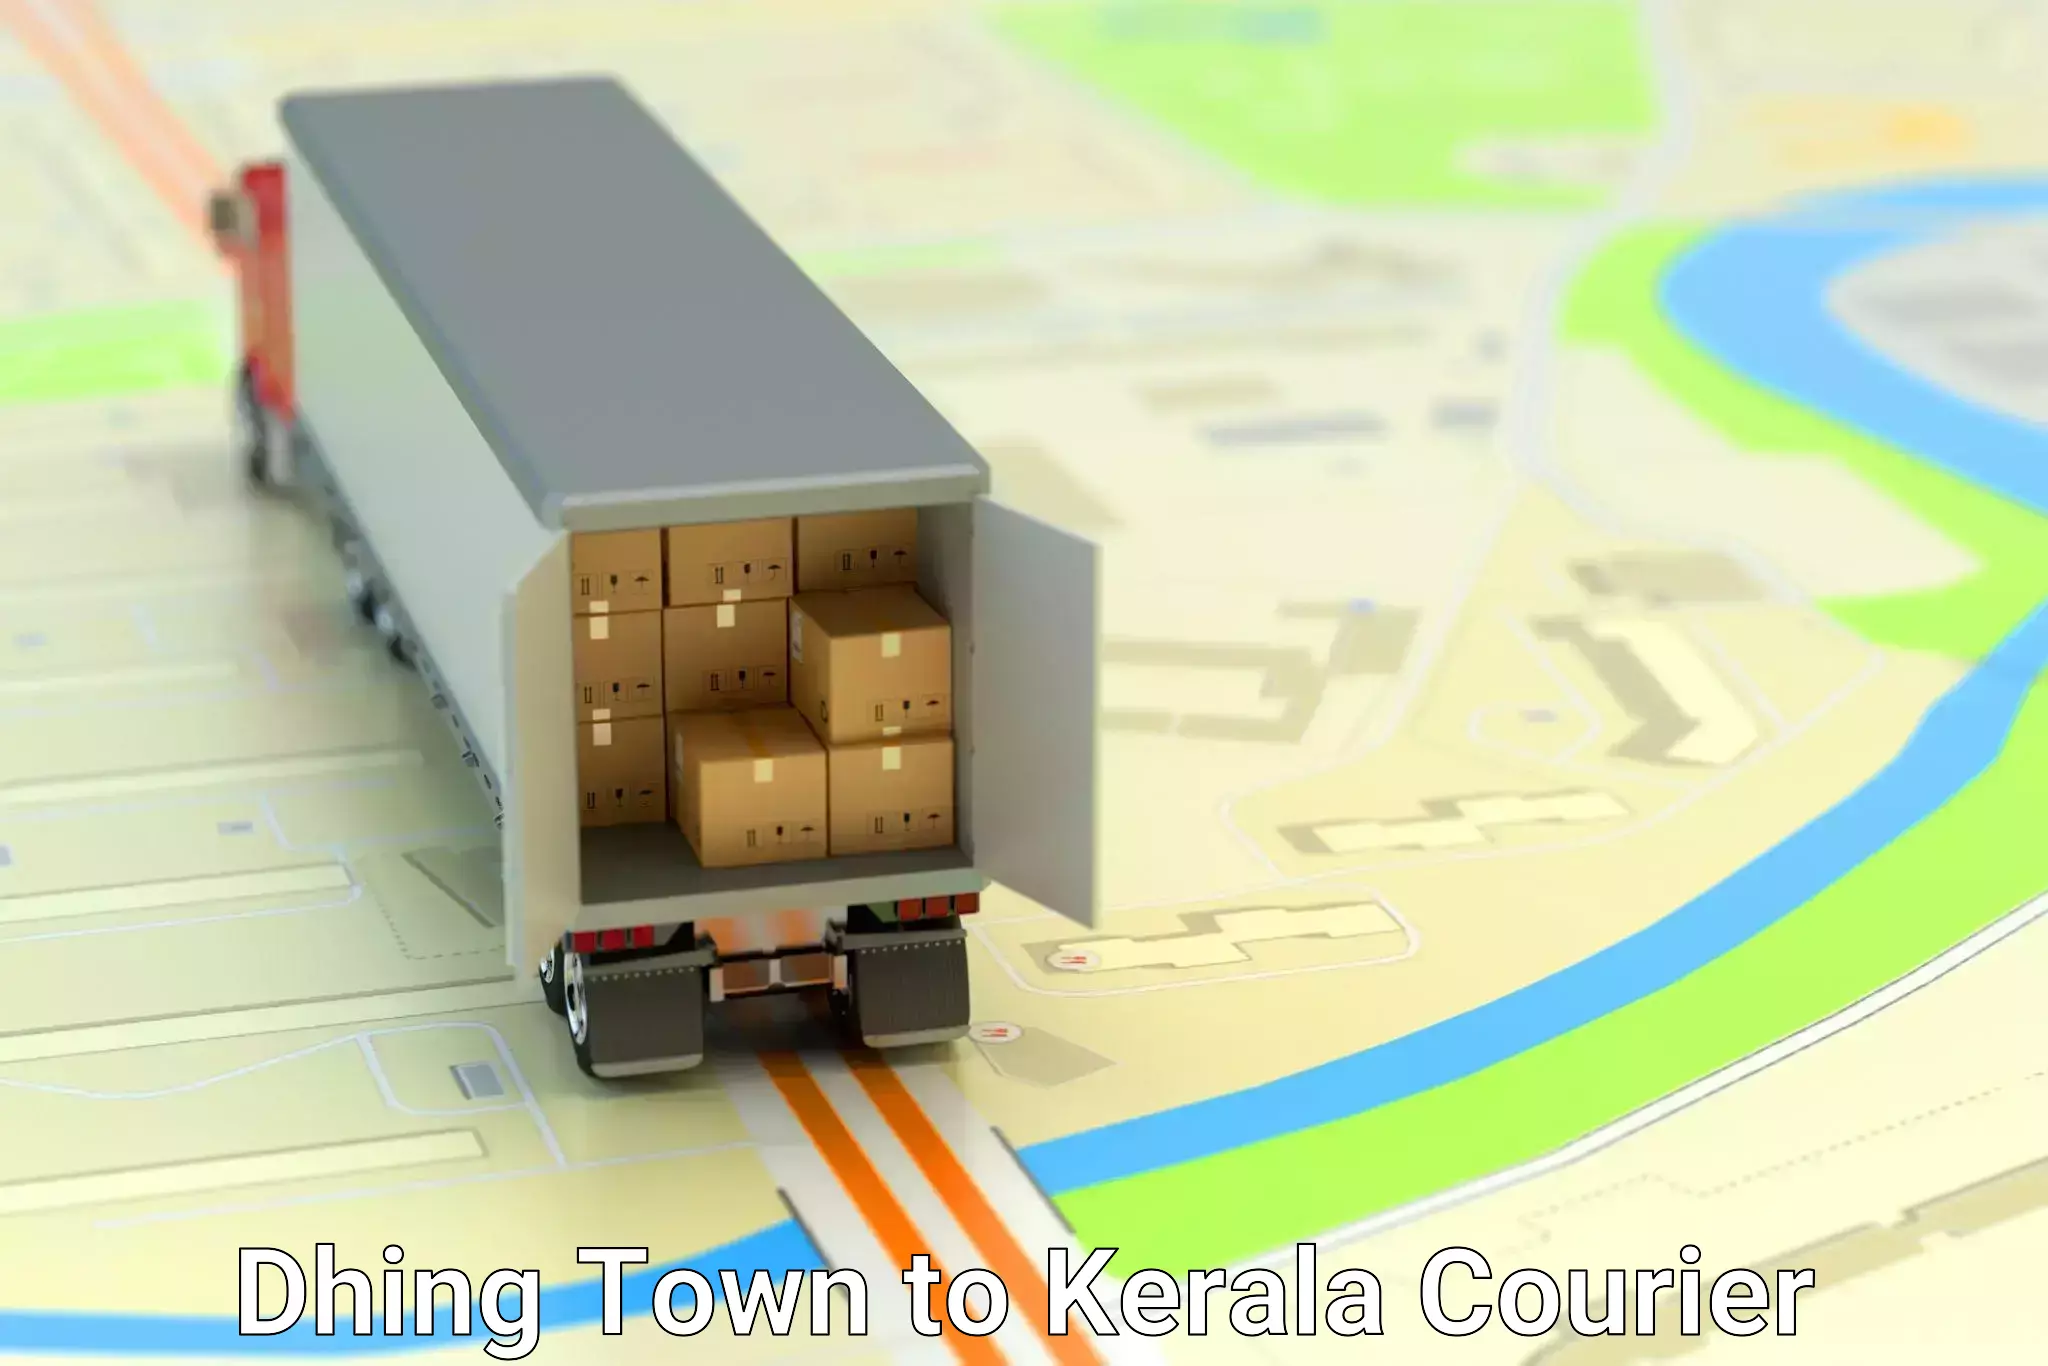 Remote area delivery Dhing Town to Kerala